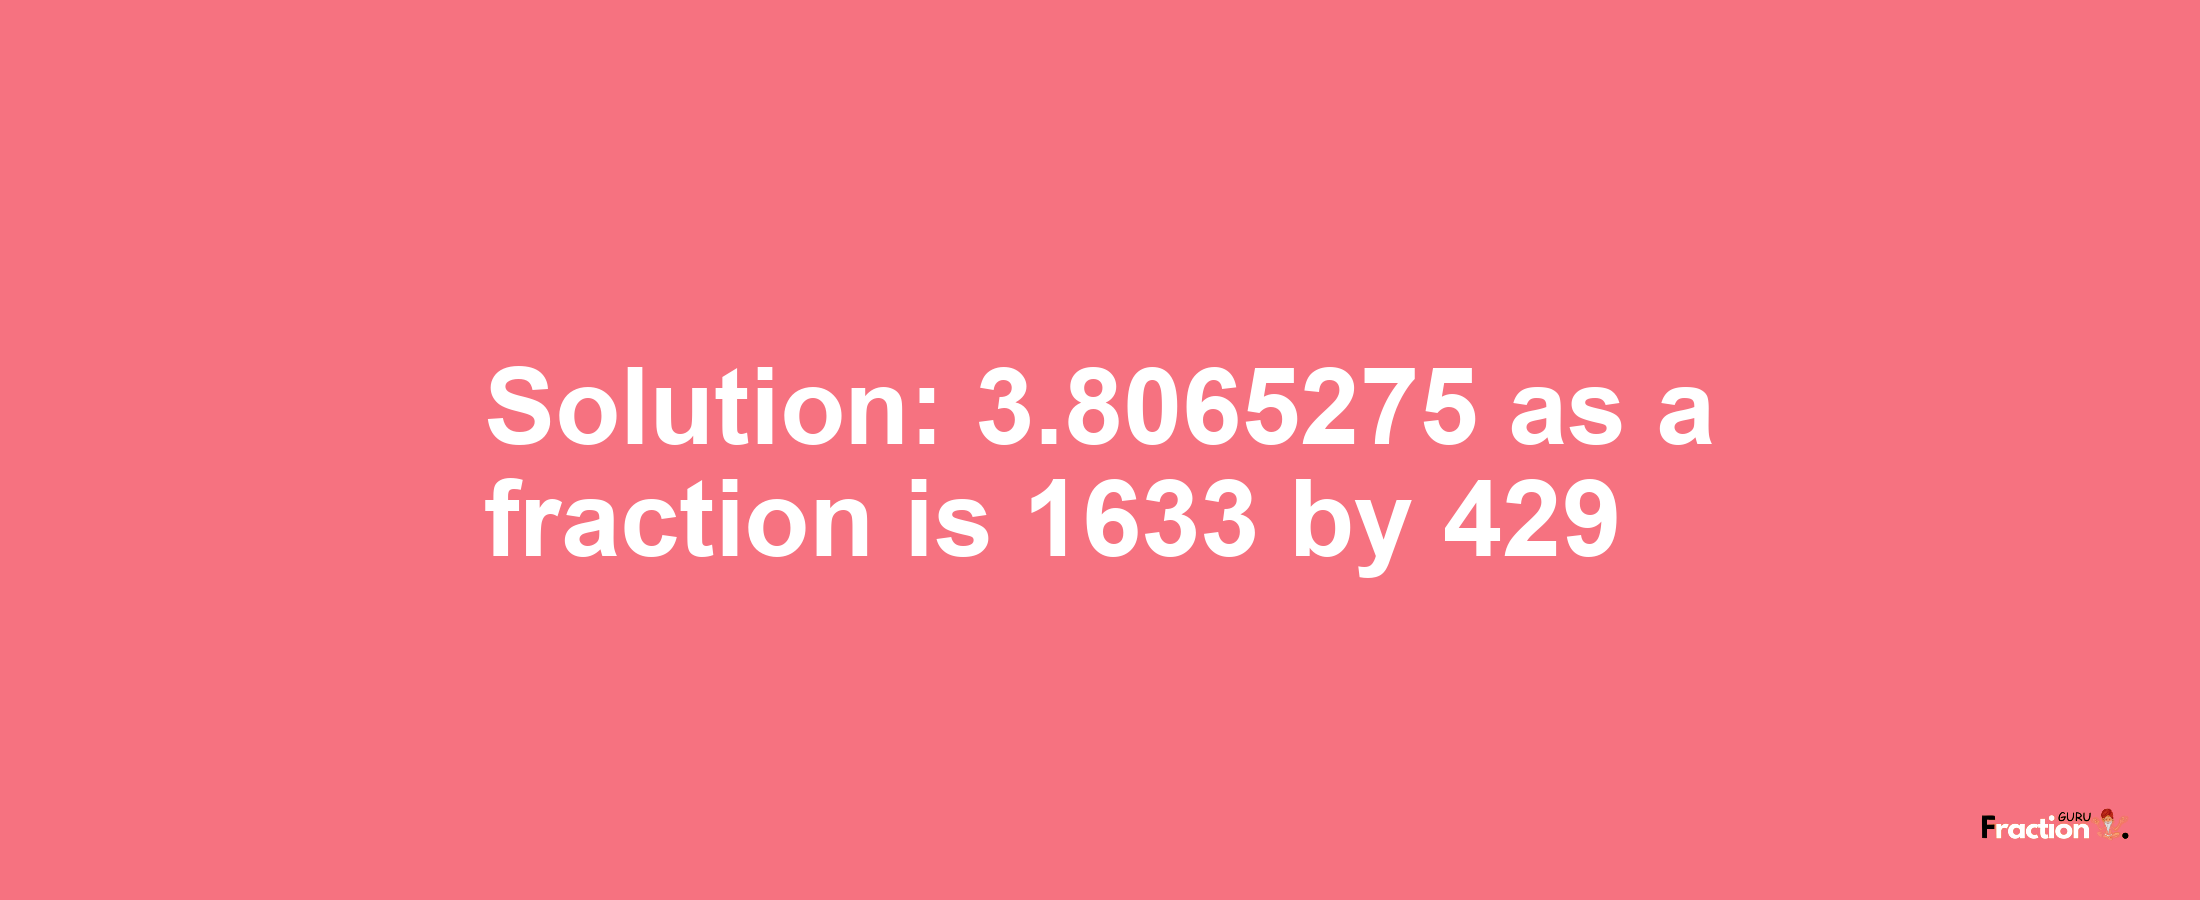 Solution:3.8065275 as a fraction is 1633/429